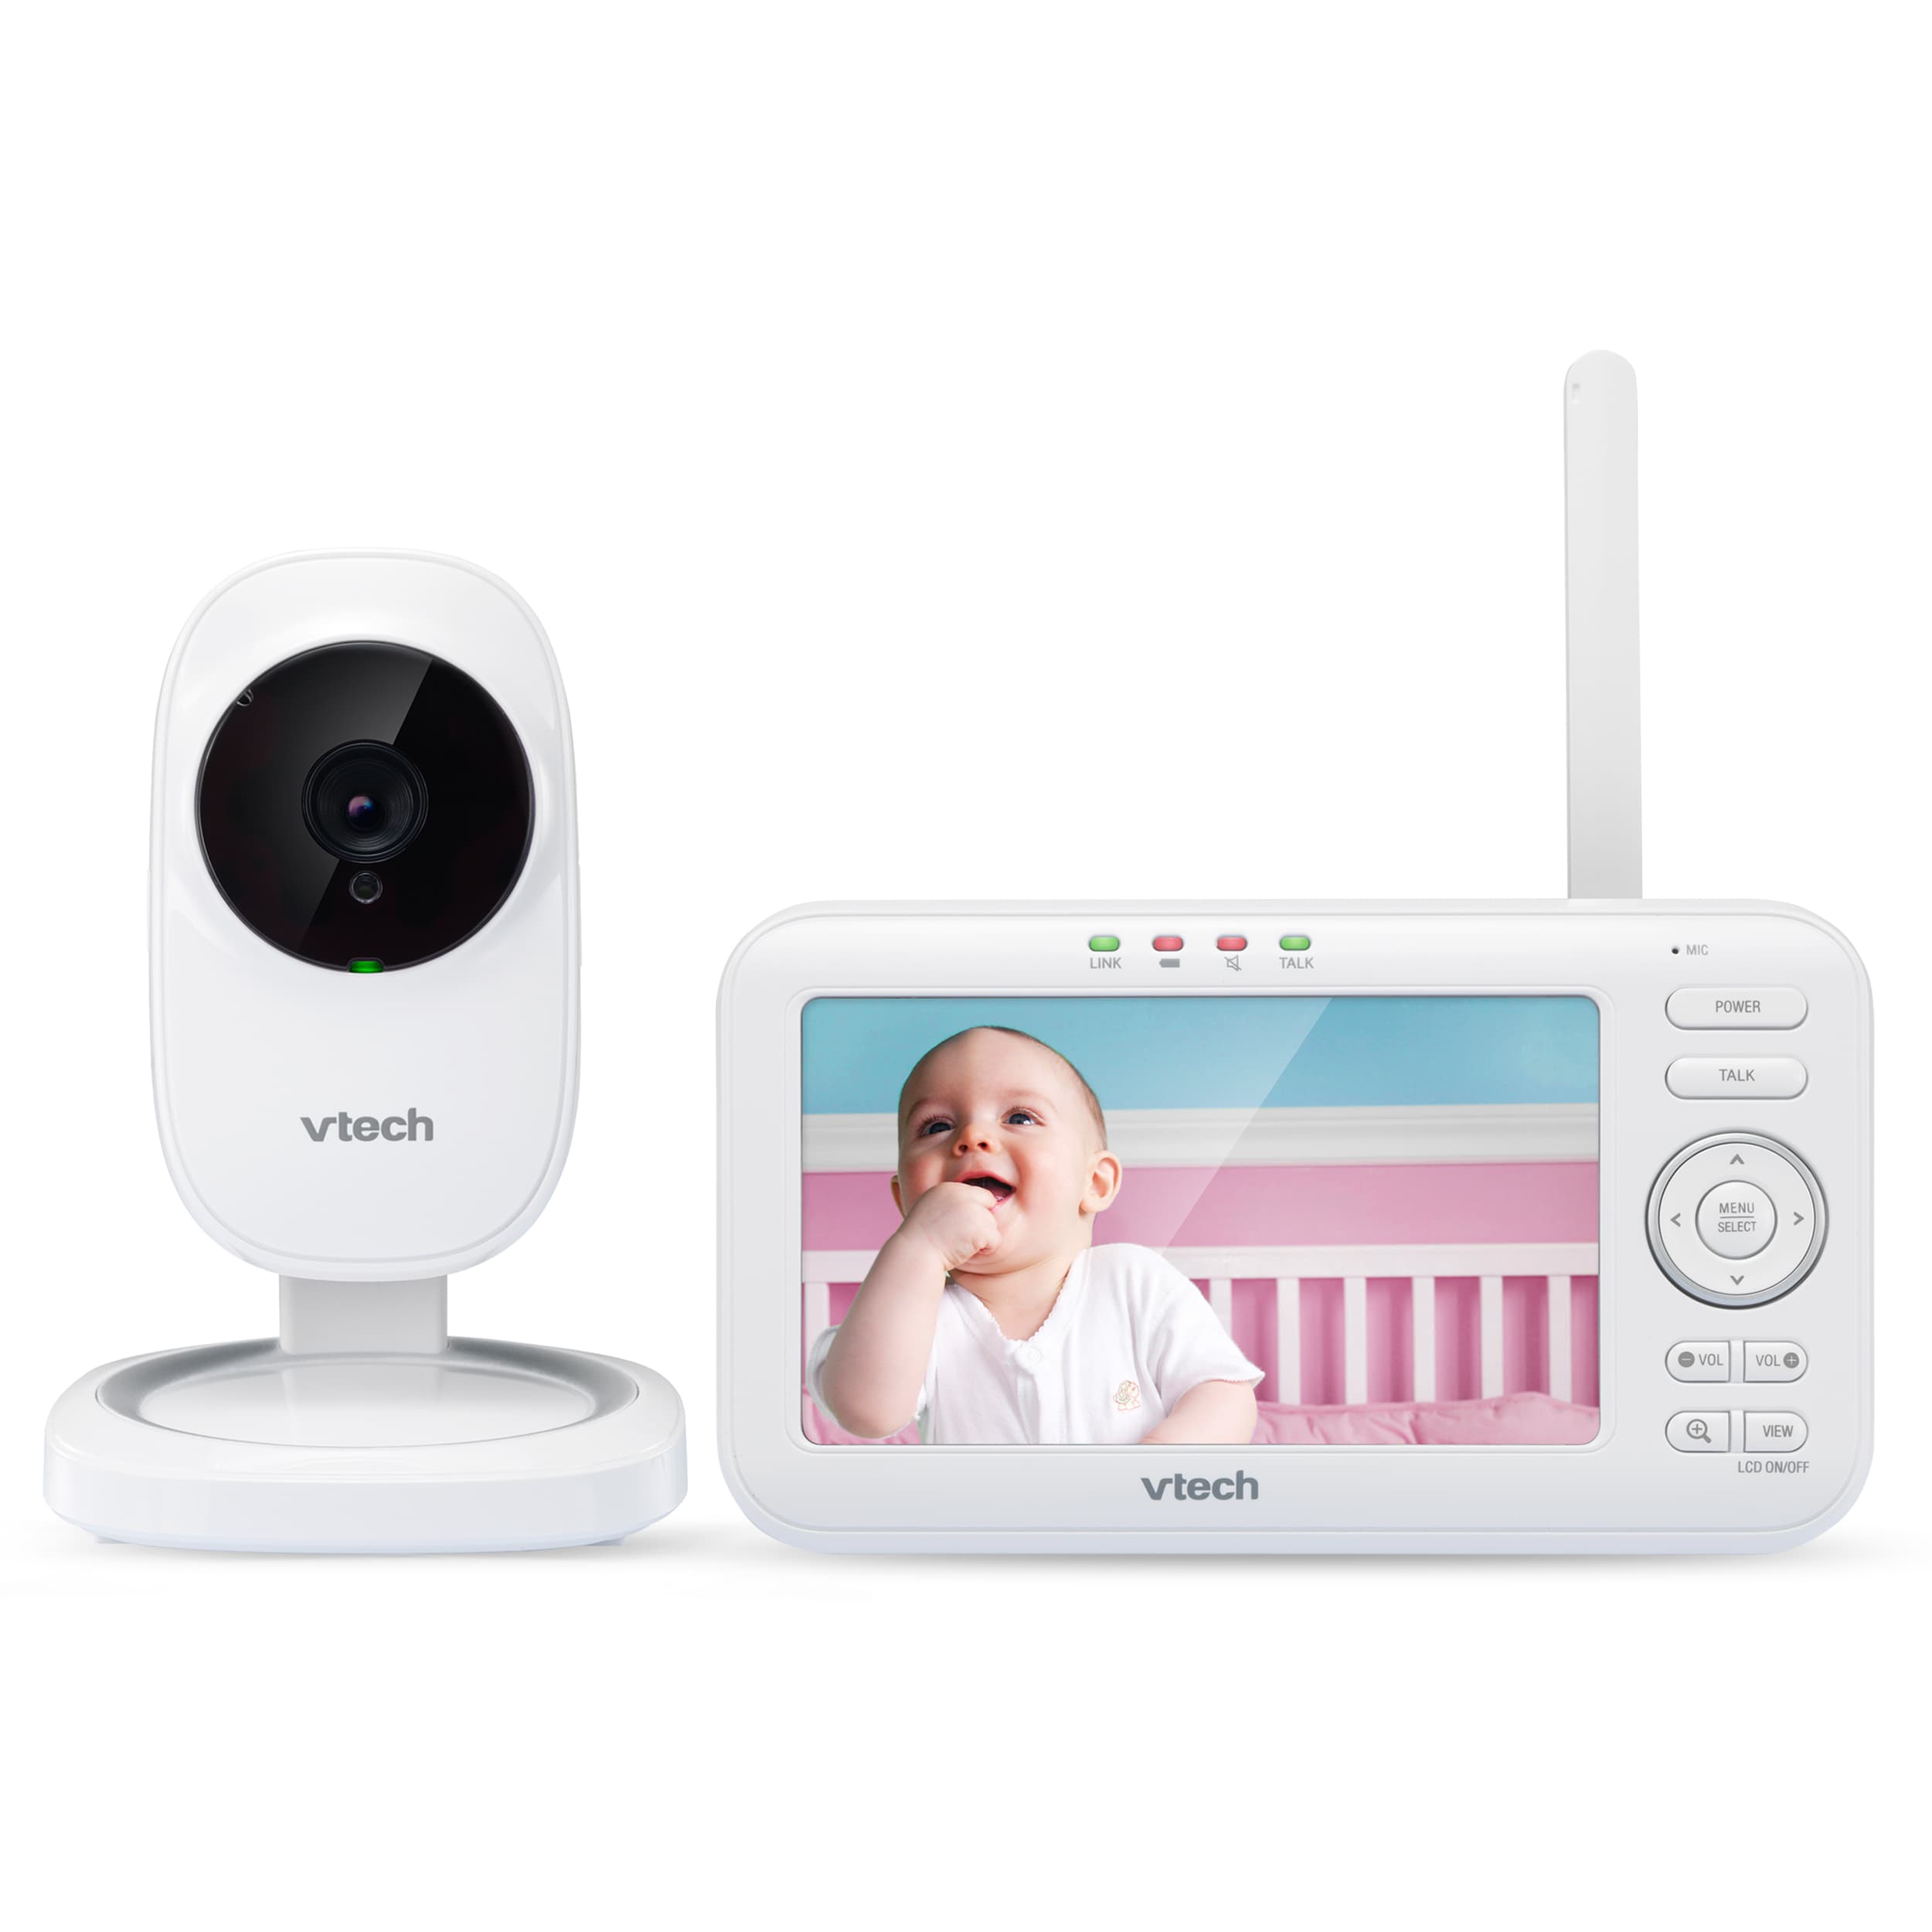 5" Digital Video Baby Monitor with Full-Color and Automatic Night Vision - view 1